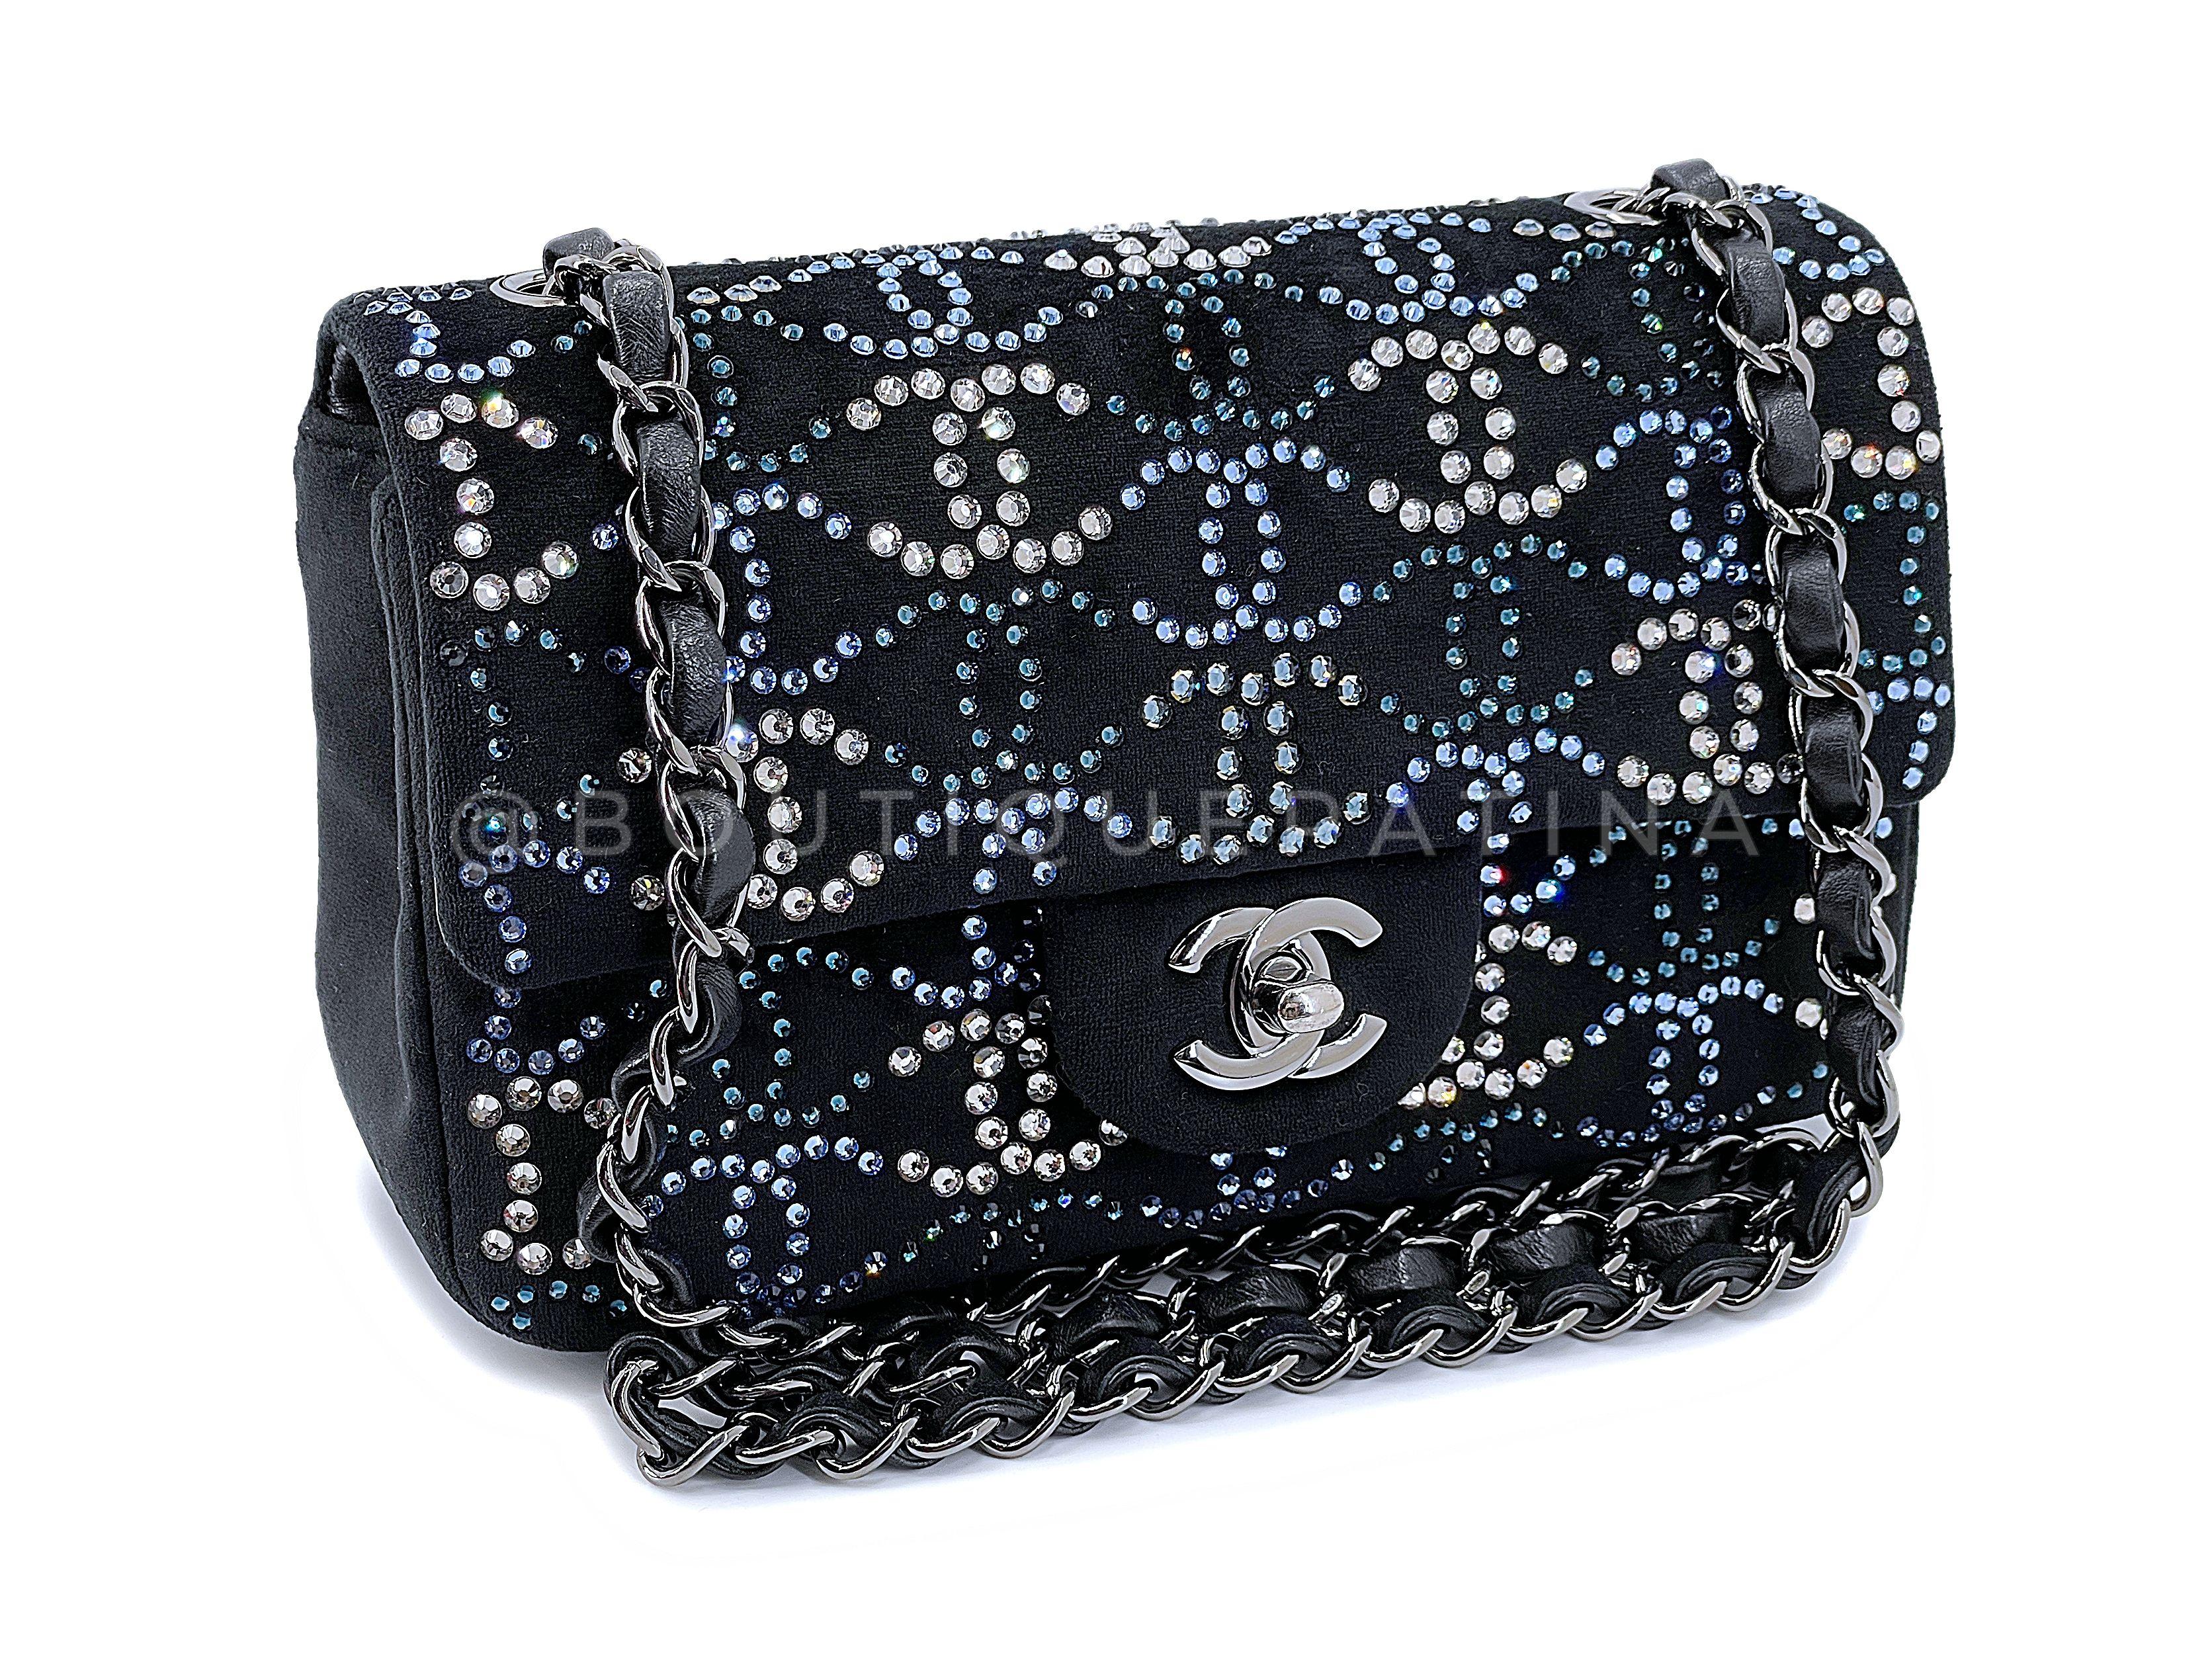 Store item: 67652
An absolute stunner of a bag is this Chanel Crystal CC Embellished Rectangular Mini Flap Bag Dark Navy Velvet RHW. Photos do not do it justice; please reference detailed videos in our #minidrop highlights on Instagram (link at top